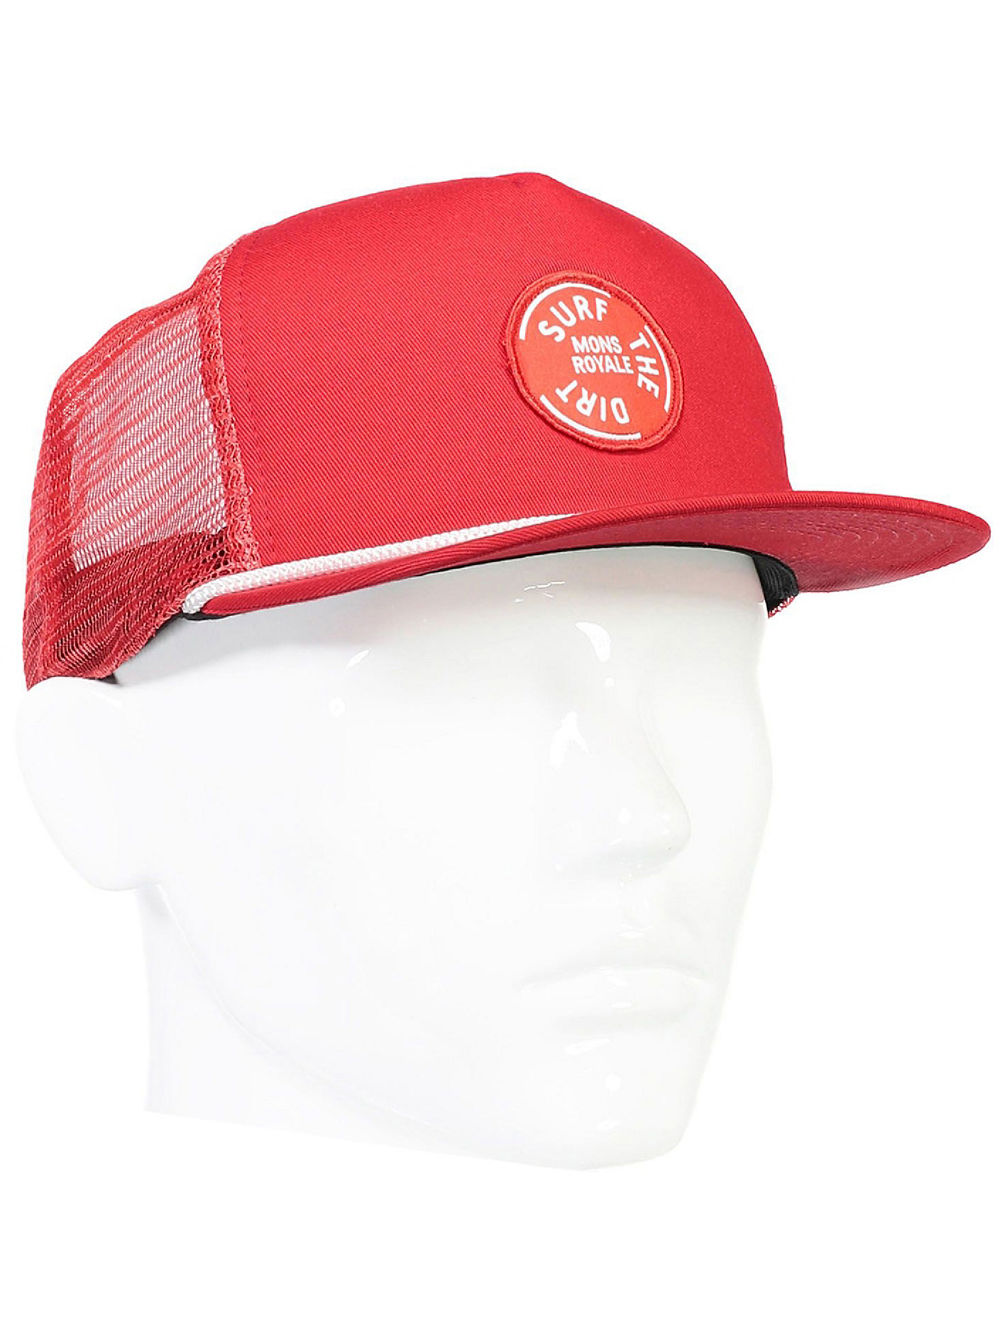 The ACL Trucker Surf Casquette